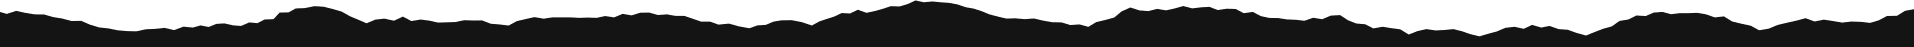 A black and green background with a white line.